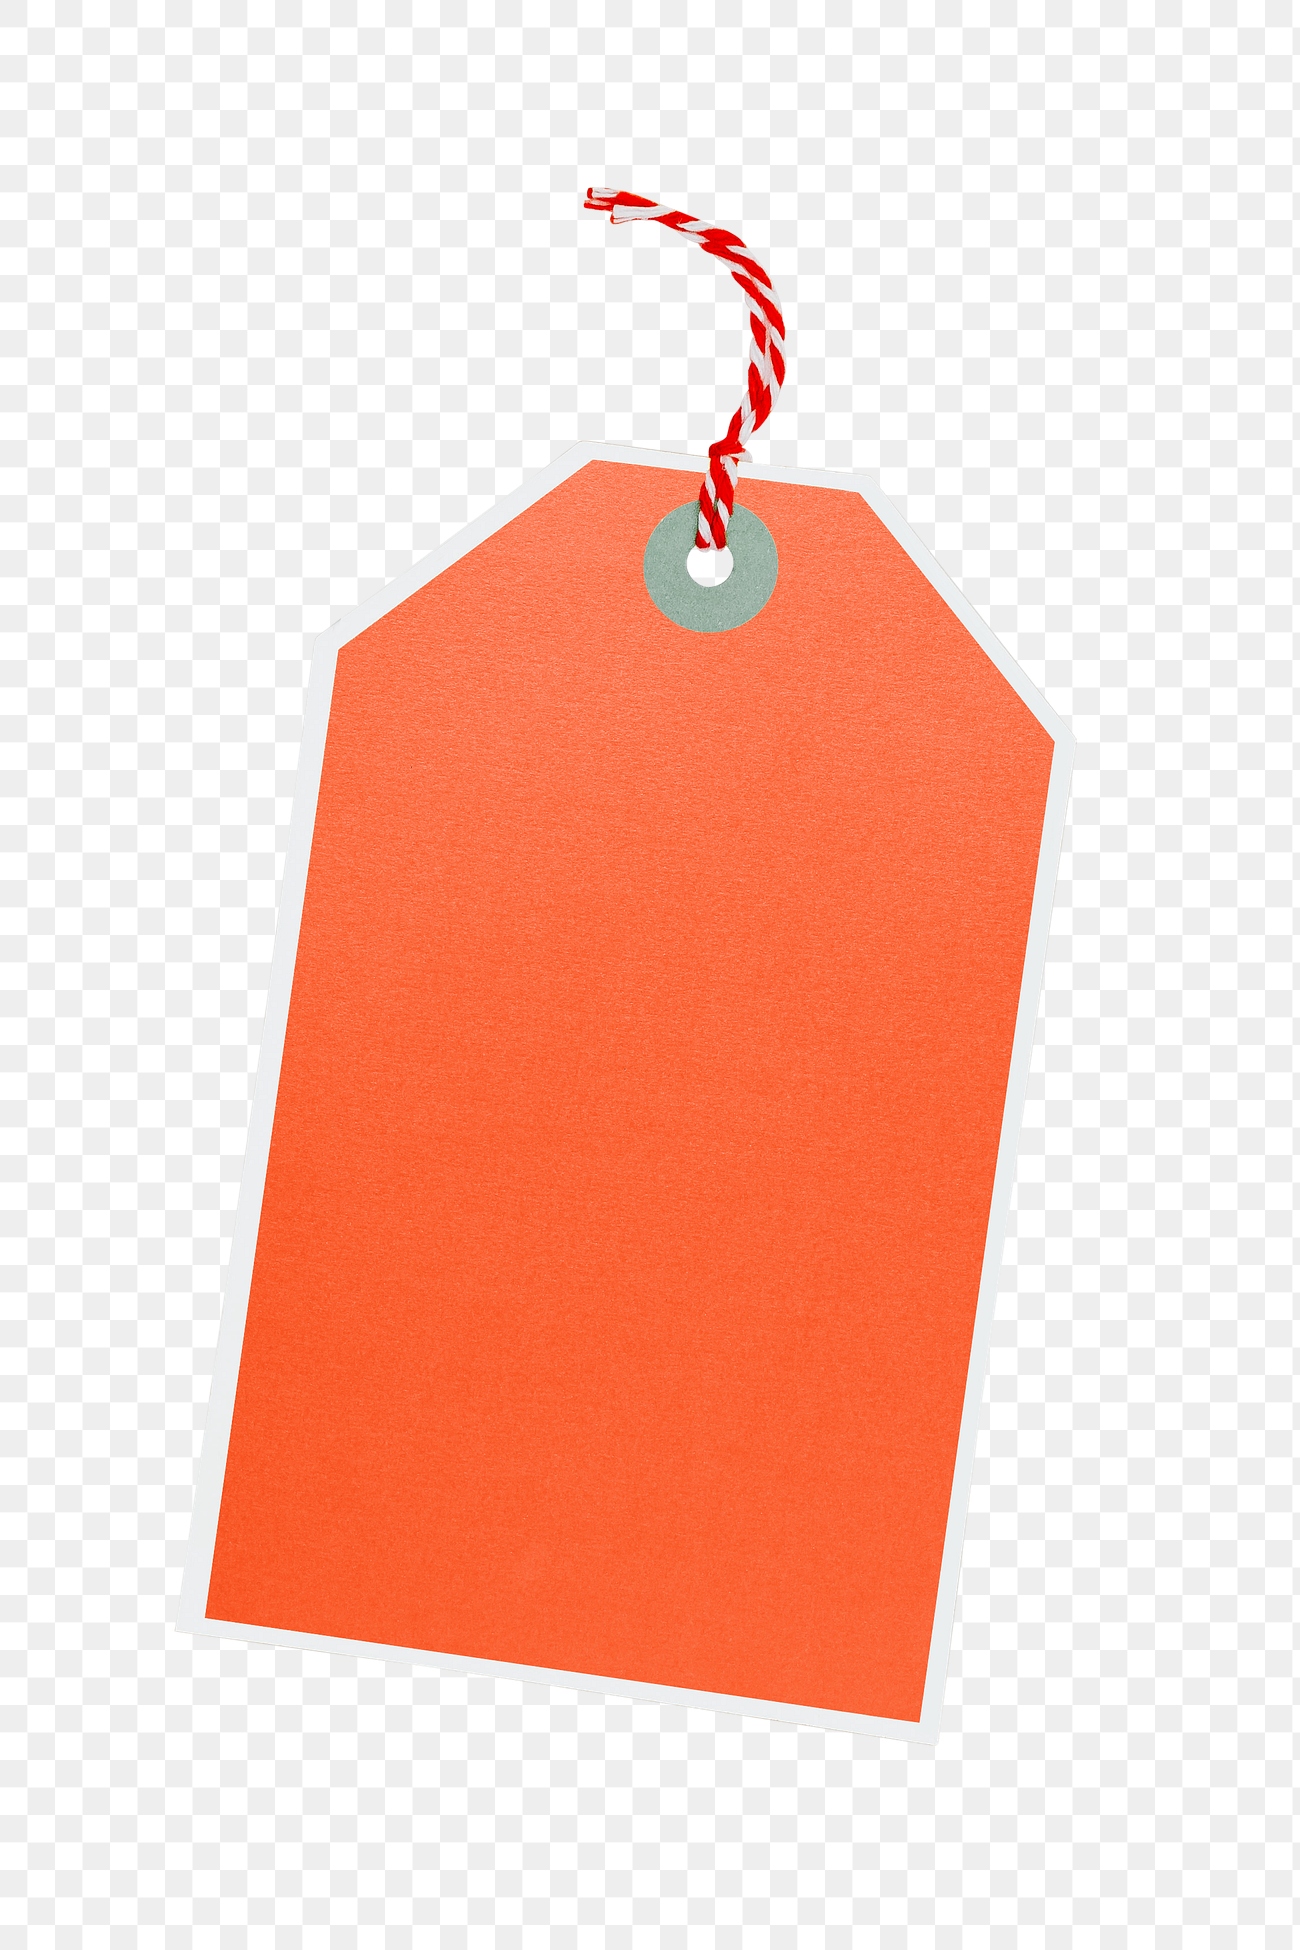 Blank gift tag png | Free stock illustration | High Resolution graphic